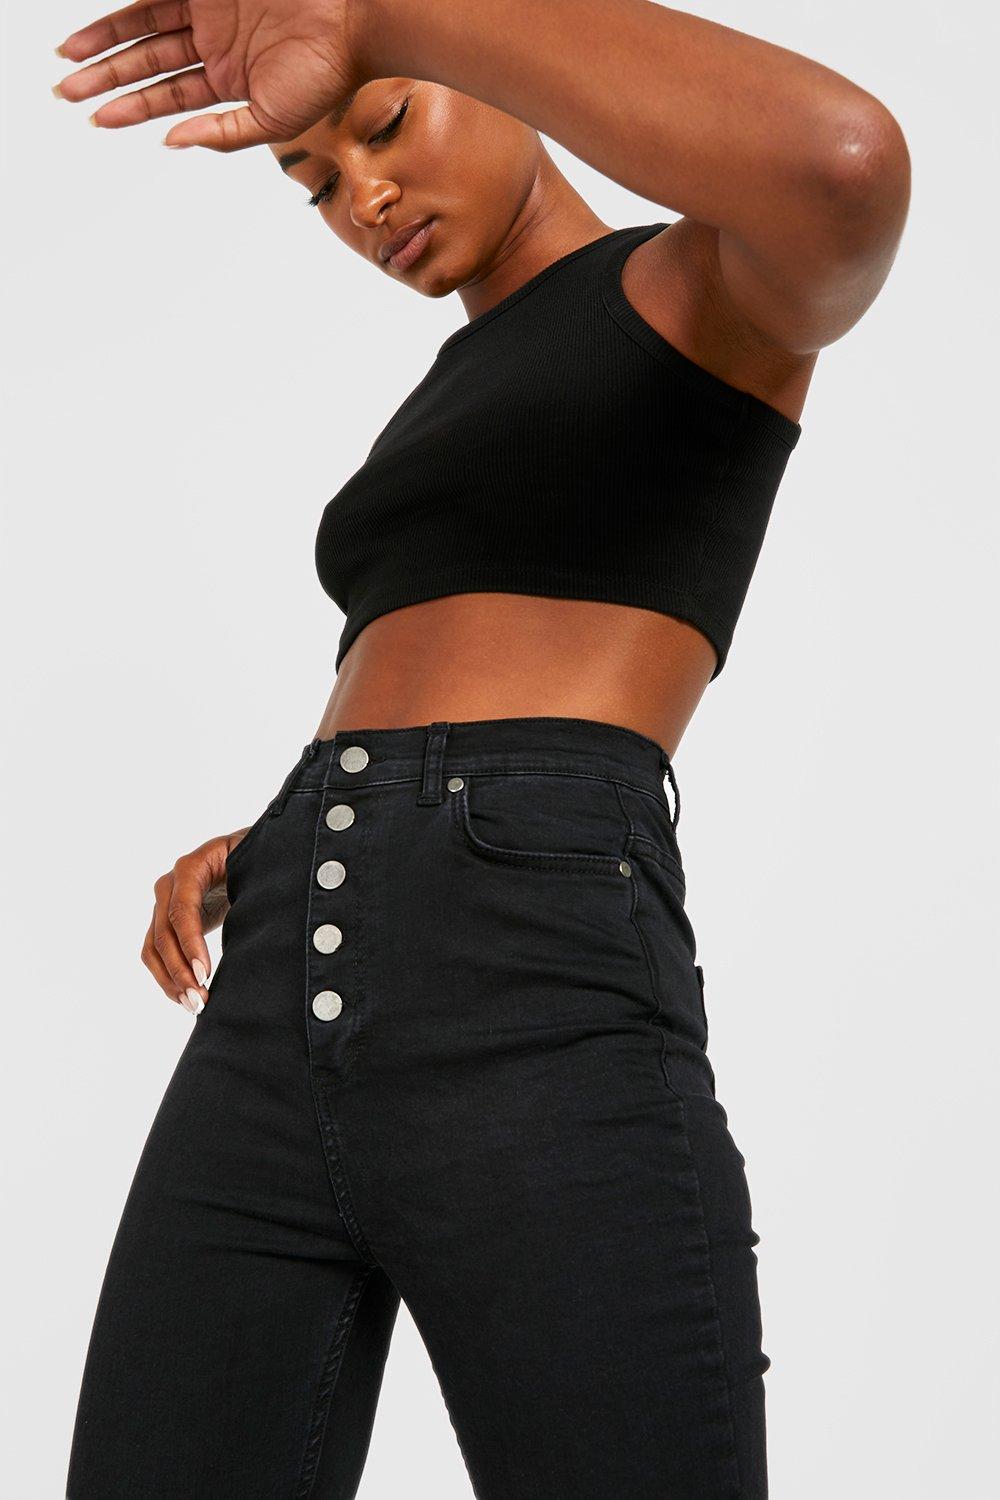 black high waisted flare jeans